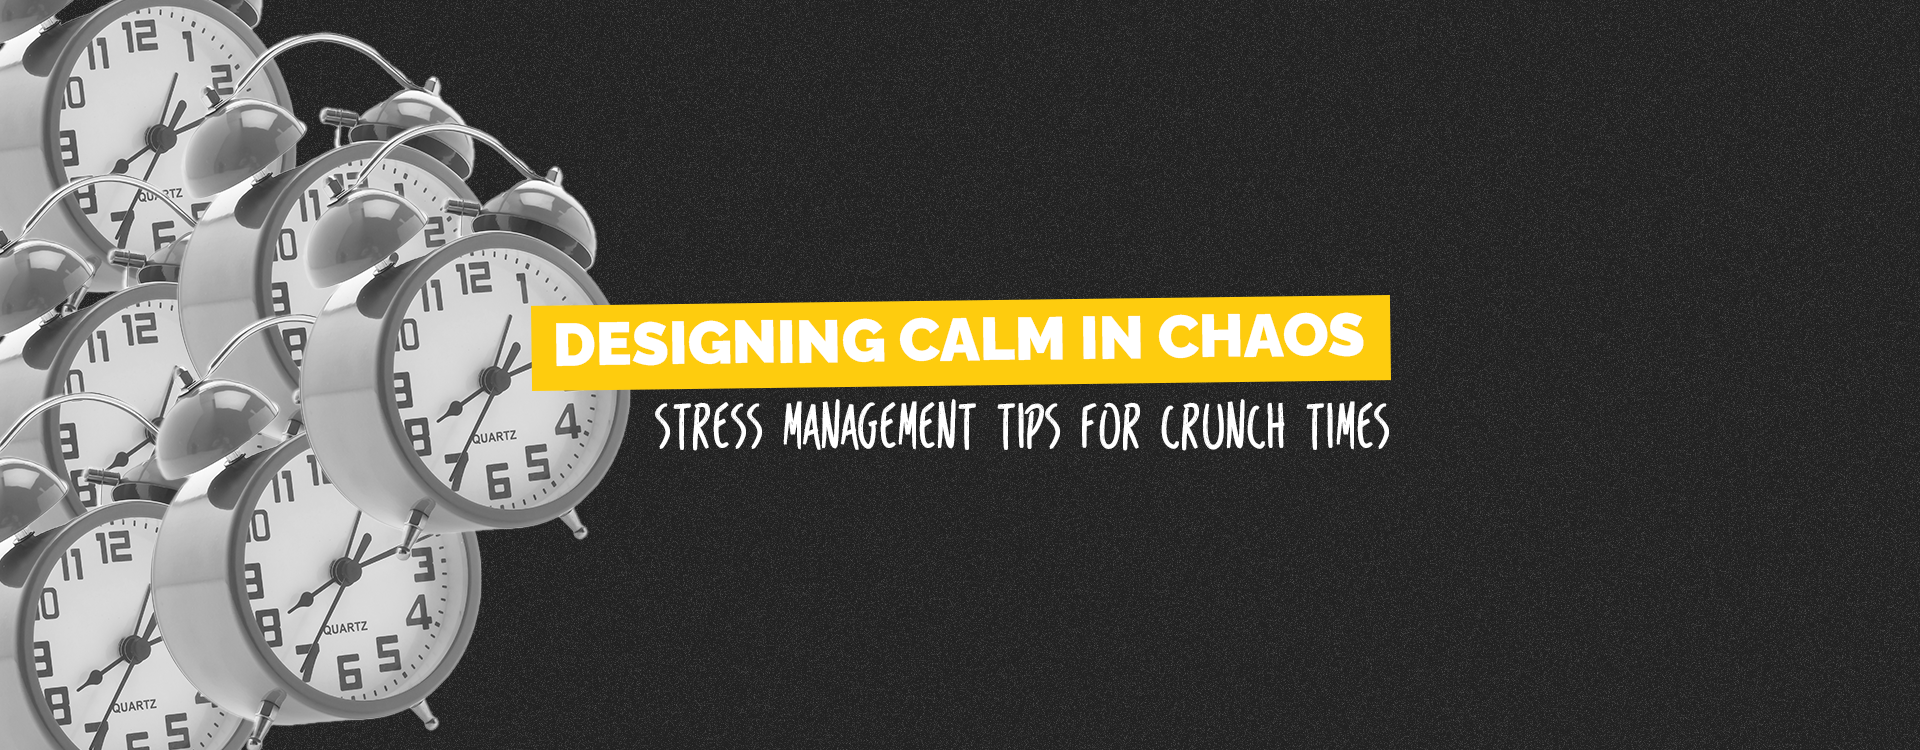 Designing Calm in Chaos: Stress Management Tips for Crunch Times